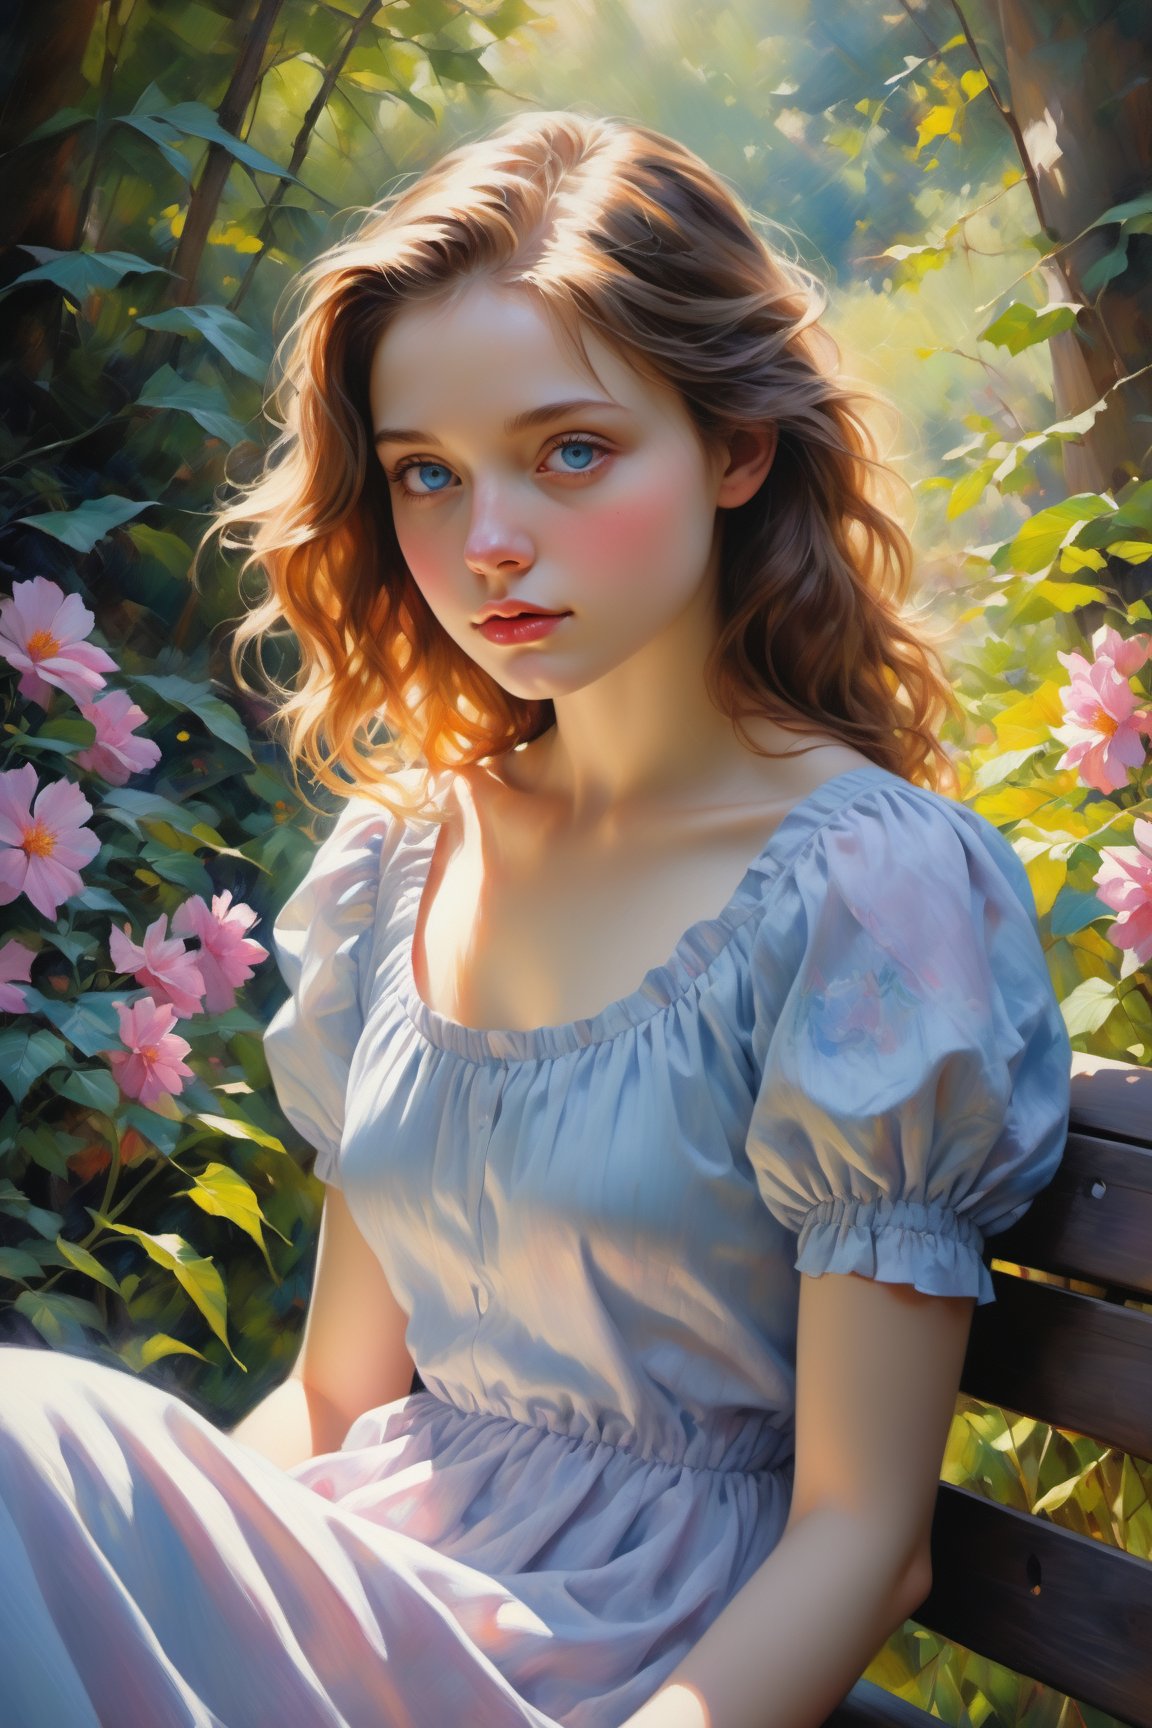 An oil painted masterpiece of a tranquil garden scene with a girl sitting on a wooden bench. The girl is wearing a flowing dress with vibrant colors that blend harmoniously with the surrounding nature. The garden is filled with lush greenery, colorful flowers, and tall trees casting soft shadows. The sunlight peeks through the leaves, creating a beautiful interplay of light and shade. The girl has mesmerizing, detailed blue eyes that captivate the viewer's attention. Her lips are delicately painted with a subtle shade of pink. The artist pays great attention to the intricate details of her face, capturing her serene expression and long eyelashes. The painting is of the highest quality, with ultra-detailed brushstrokes and fine textures. It has a realistic, photorealistic quality that makes it come to life. The color palette used in the painting is vivid and vibrant, enhancing the overall visual impact. The warm, golden tones of the sunlight create a soothing ambiance. The lighting in the painting is akin to that of a dream, with soft, diffused light illuminating the scene. The composition and perspective of the painting create a sense of depth and presence, making the viewer feel as if they are a part of the garden.